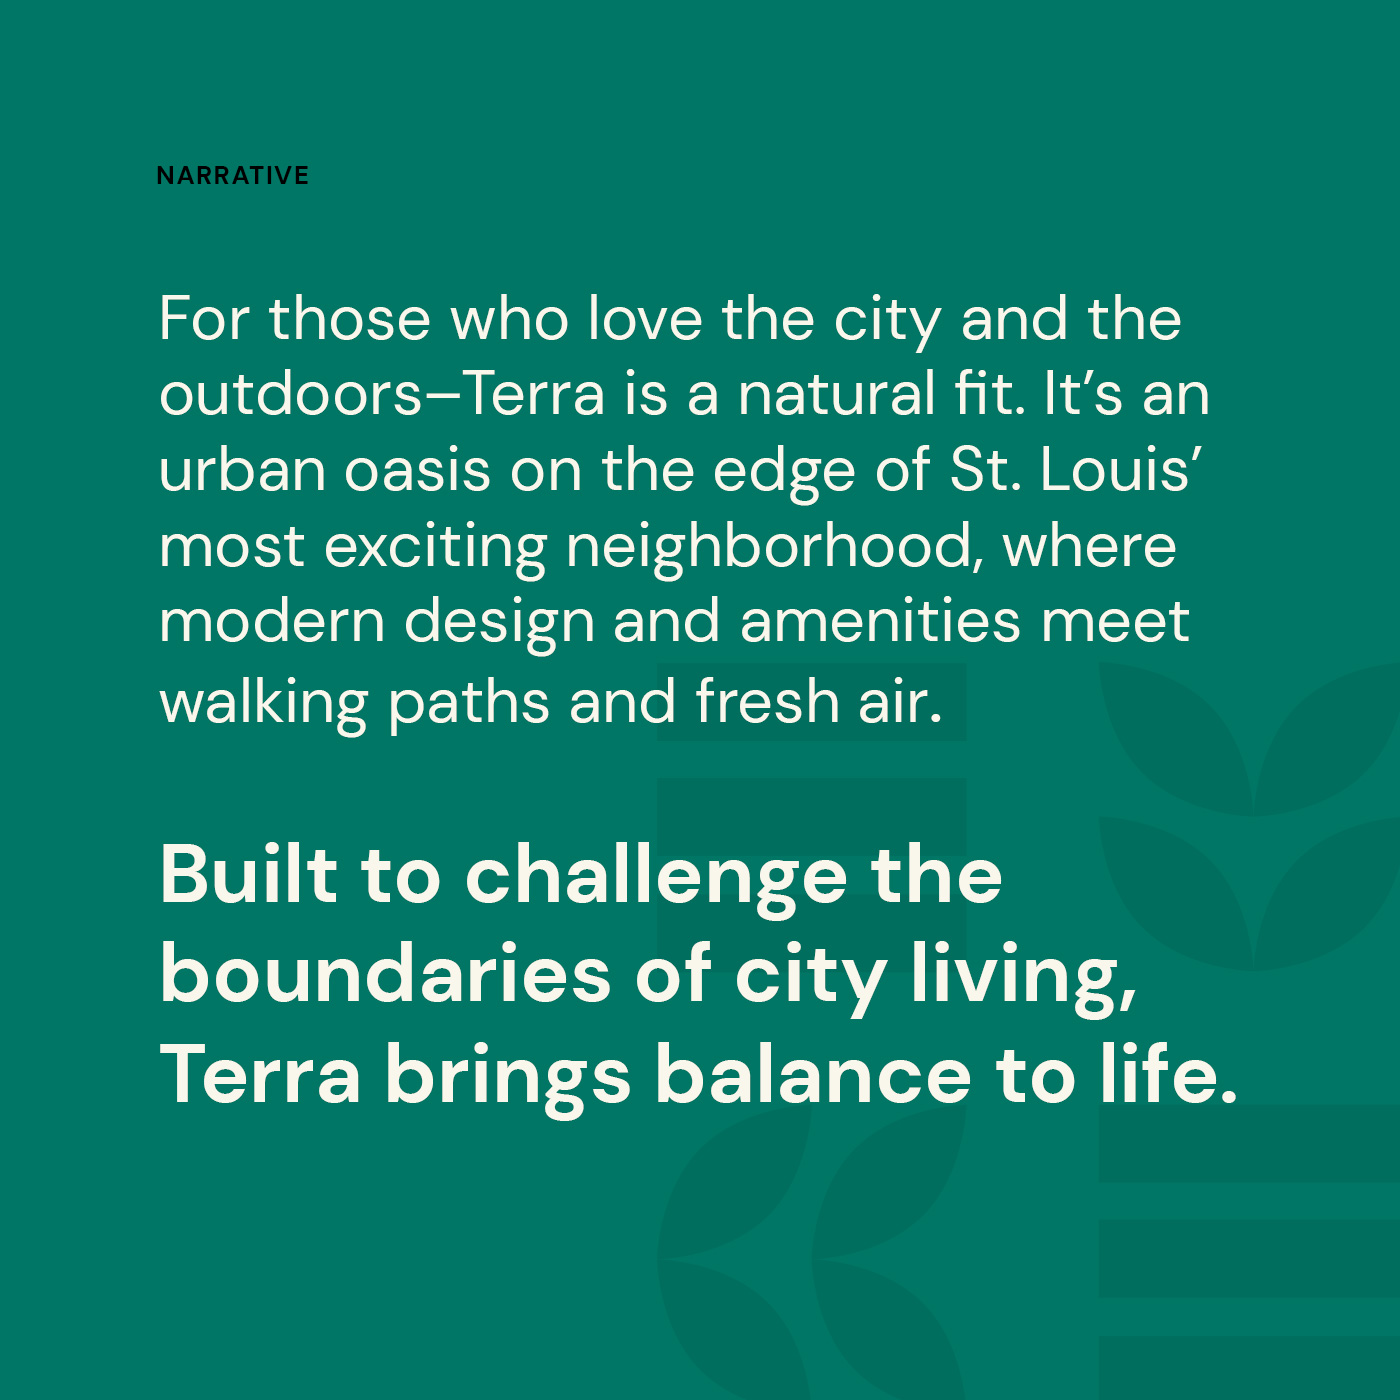 Brand narrative for the Terra residential development branding, including the line "Built to challenge the boundaries of city living, Terra brings balance to life.